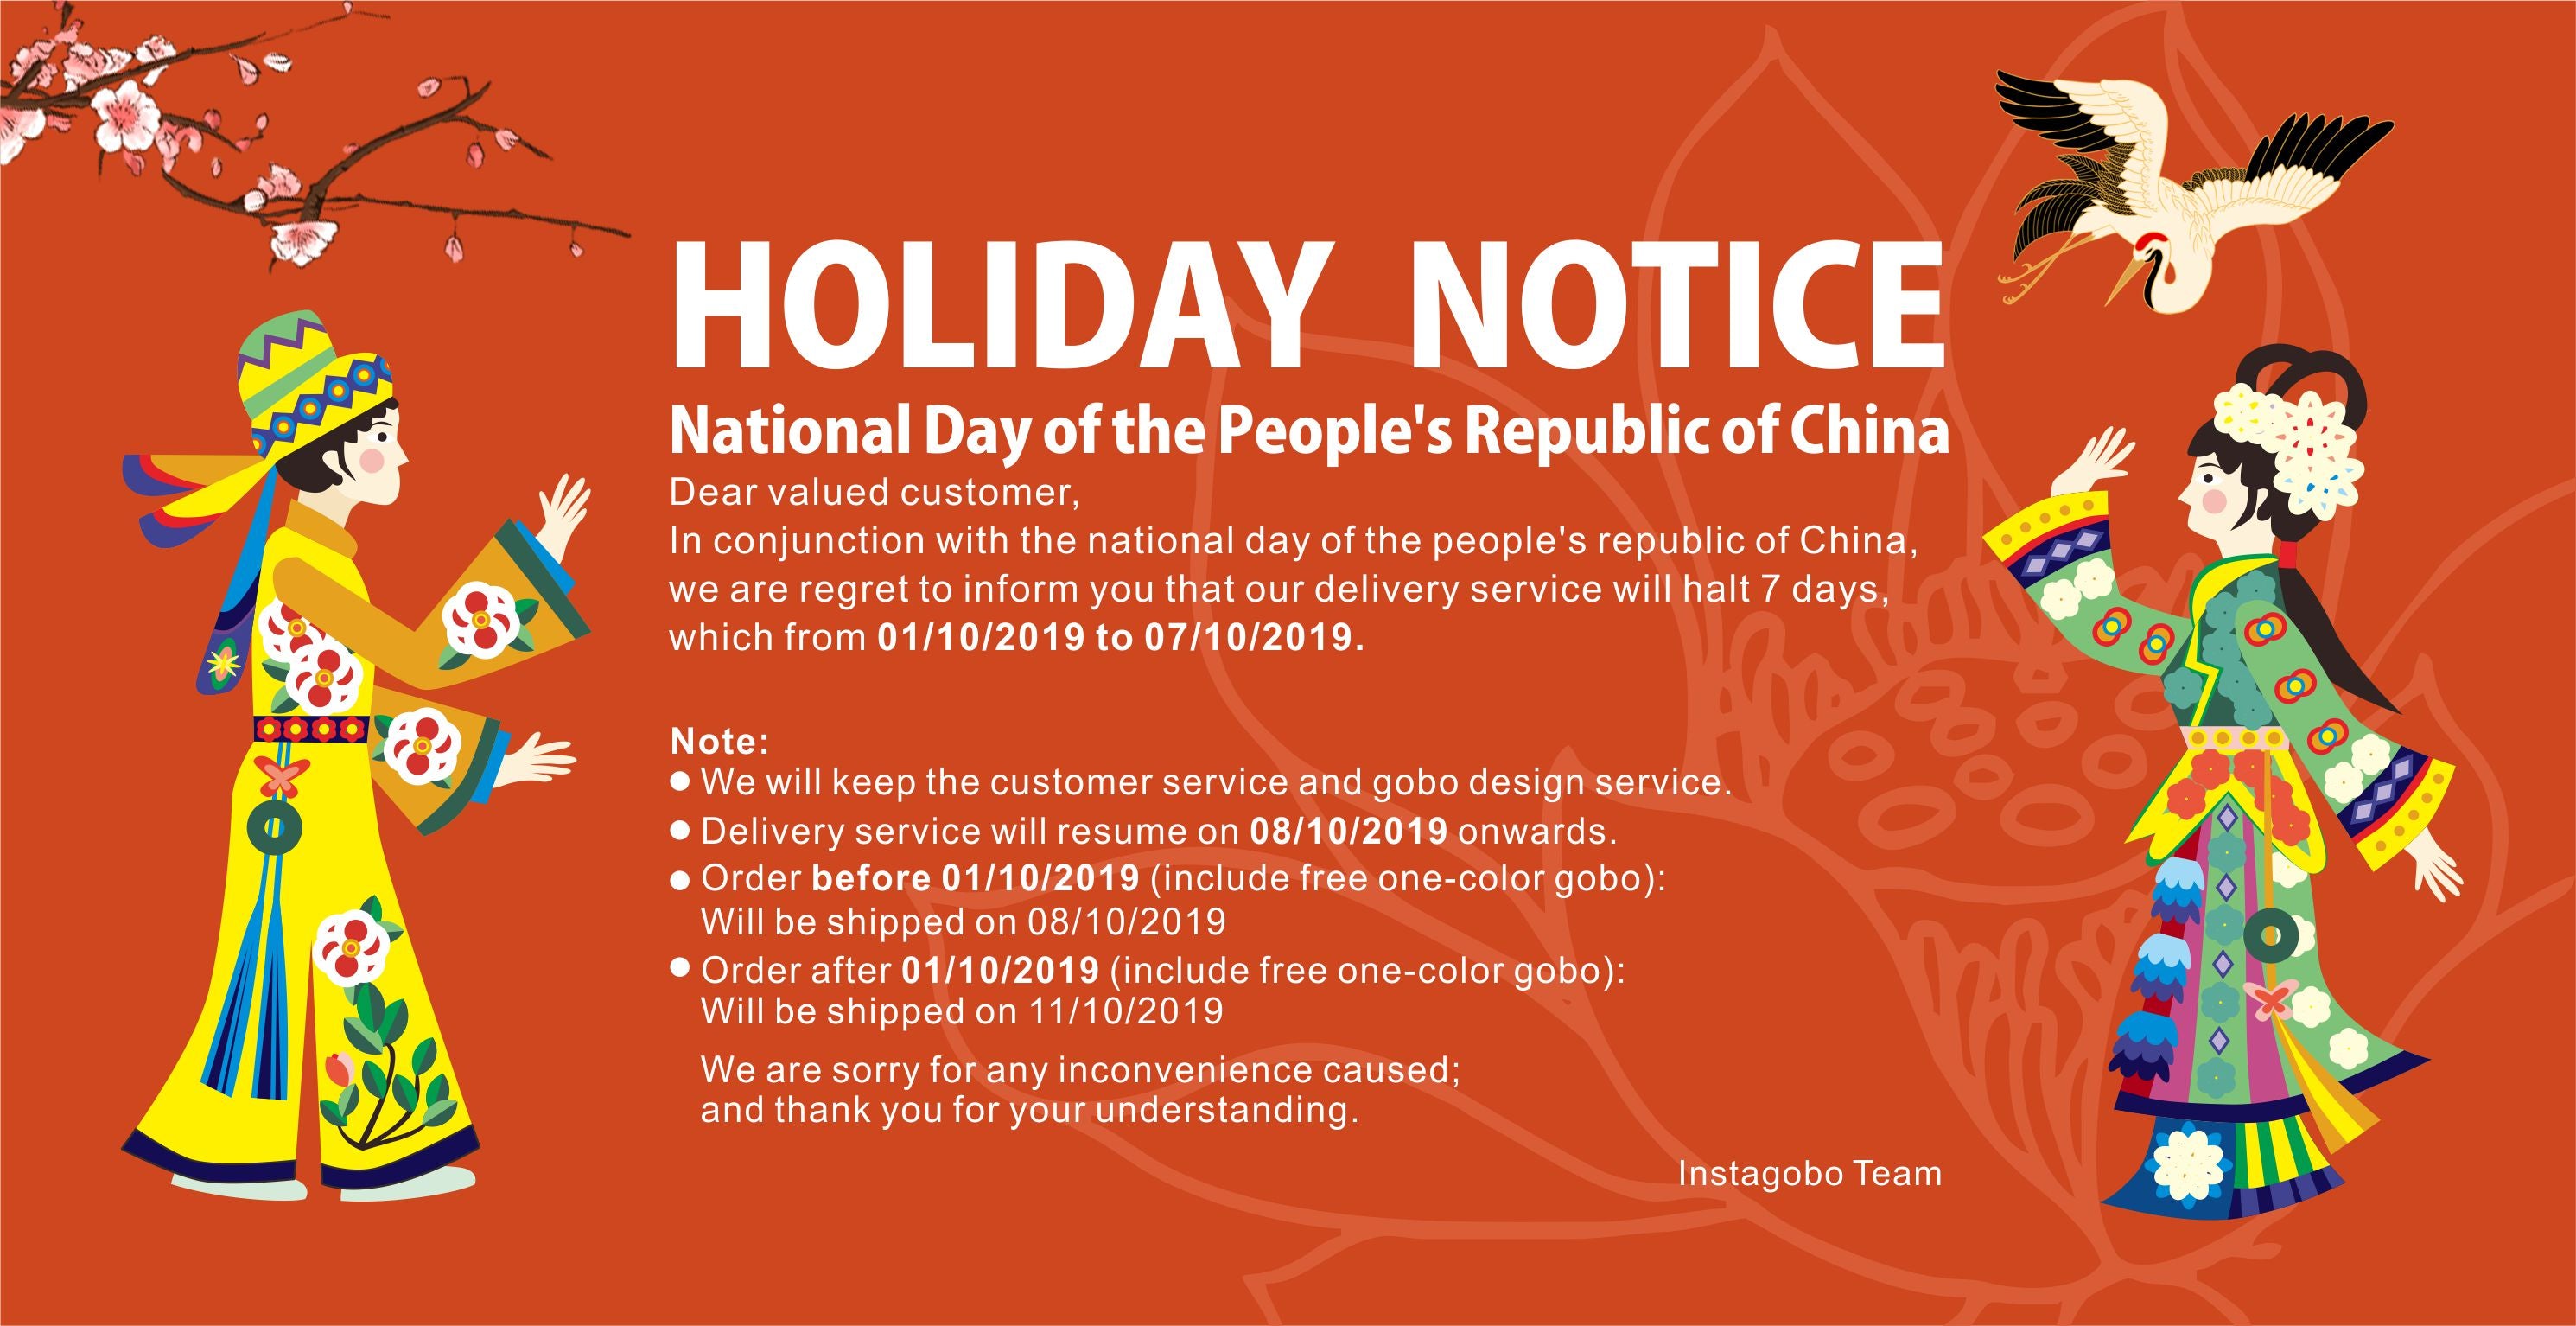 HOLIDAY NOTICE - National Day of the People's Republic of China